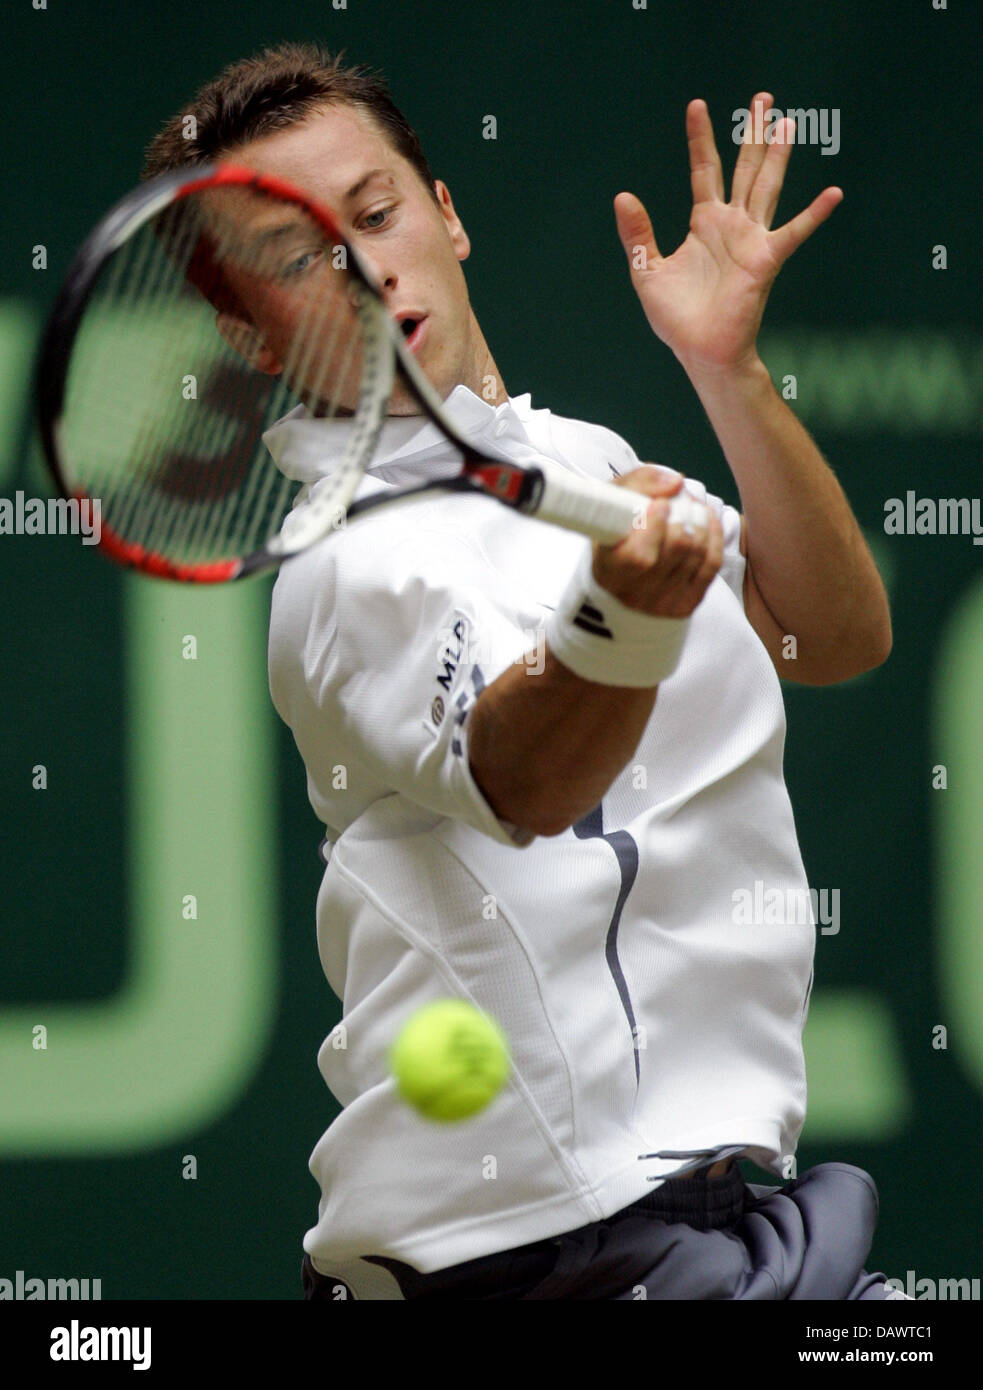 German tennis pro Philipp Kohlschreiber smashes a forehand in his quarter-finals match against seeded US James Blake at the 15th Gerry Weber Open in Halle/Westfalia, Germany, 15 June 2007. Kohlschreiber defeats Blake 6-4, 6-3. Photo: Bernd Thissen Stock Photo